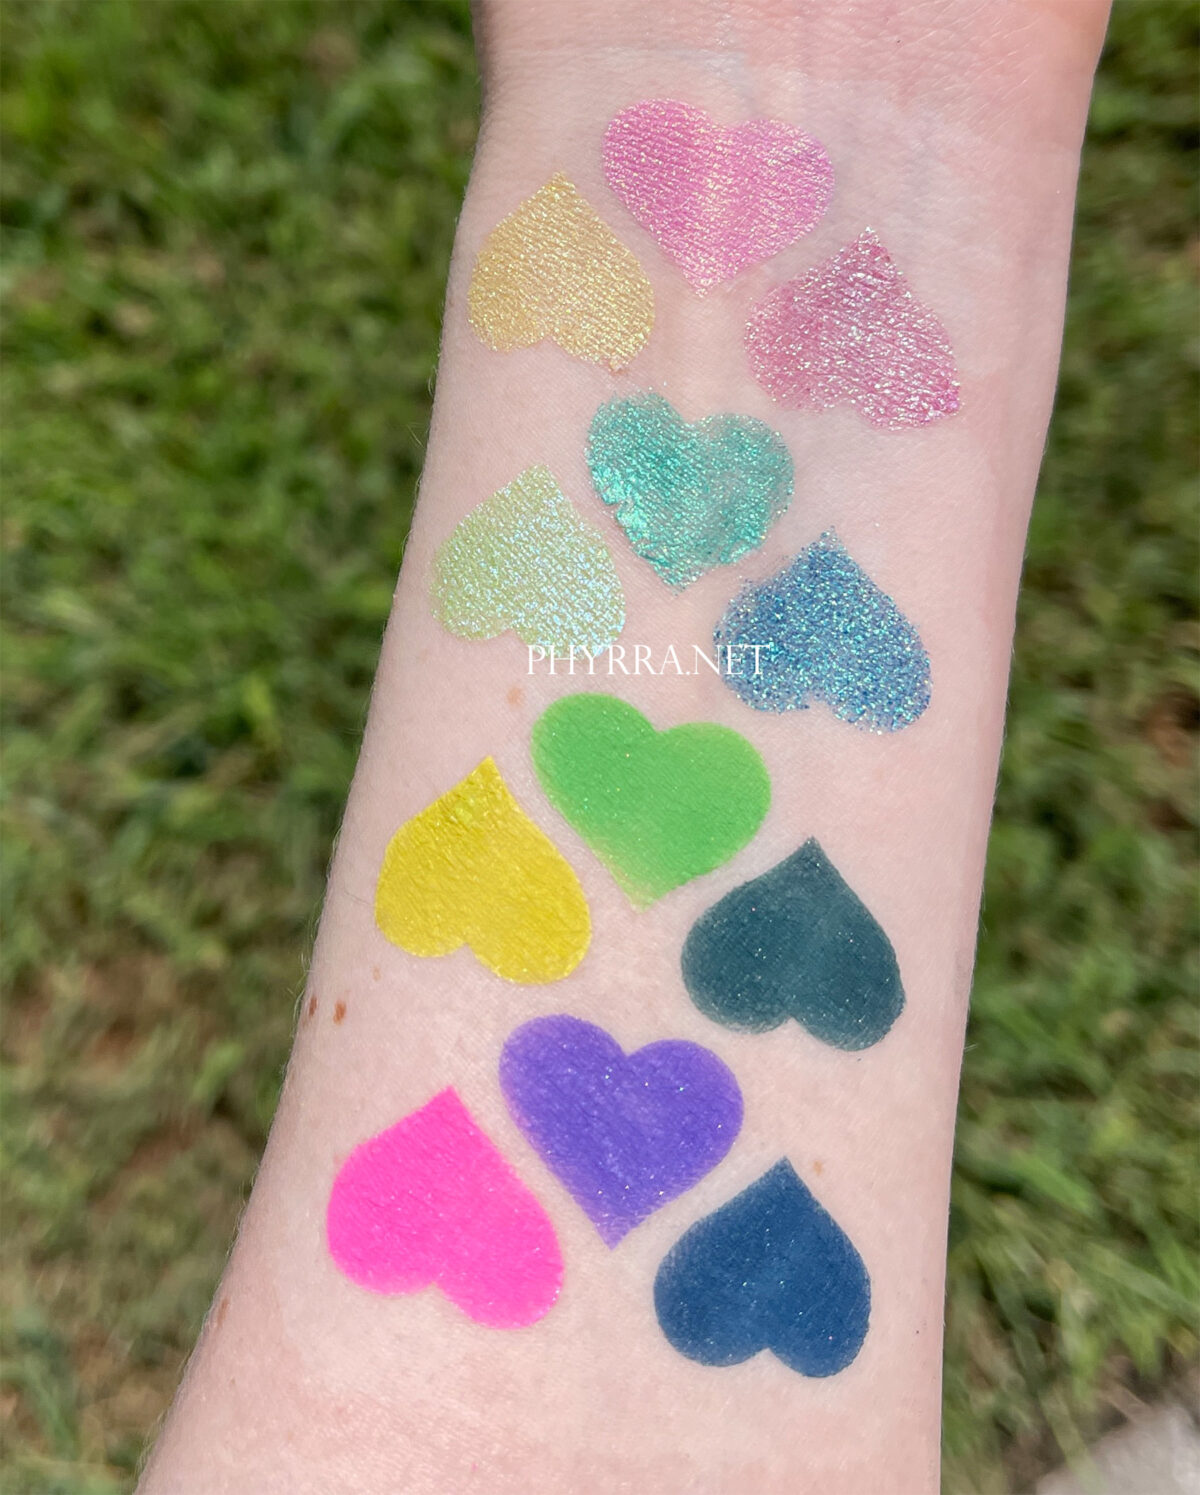 Lethal Cosmetics 1Up Palette Swatches on very fair neutral skin